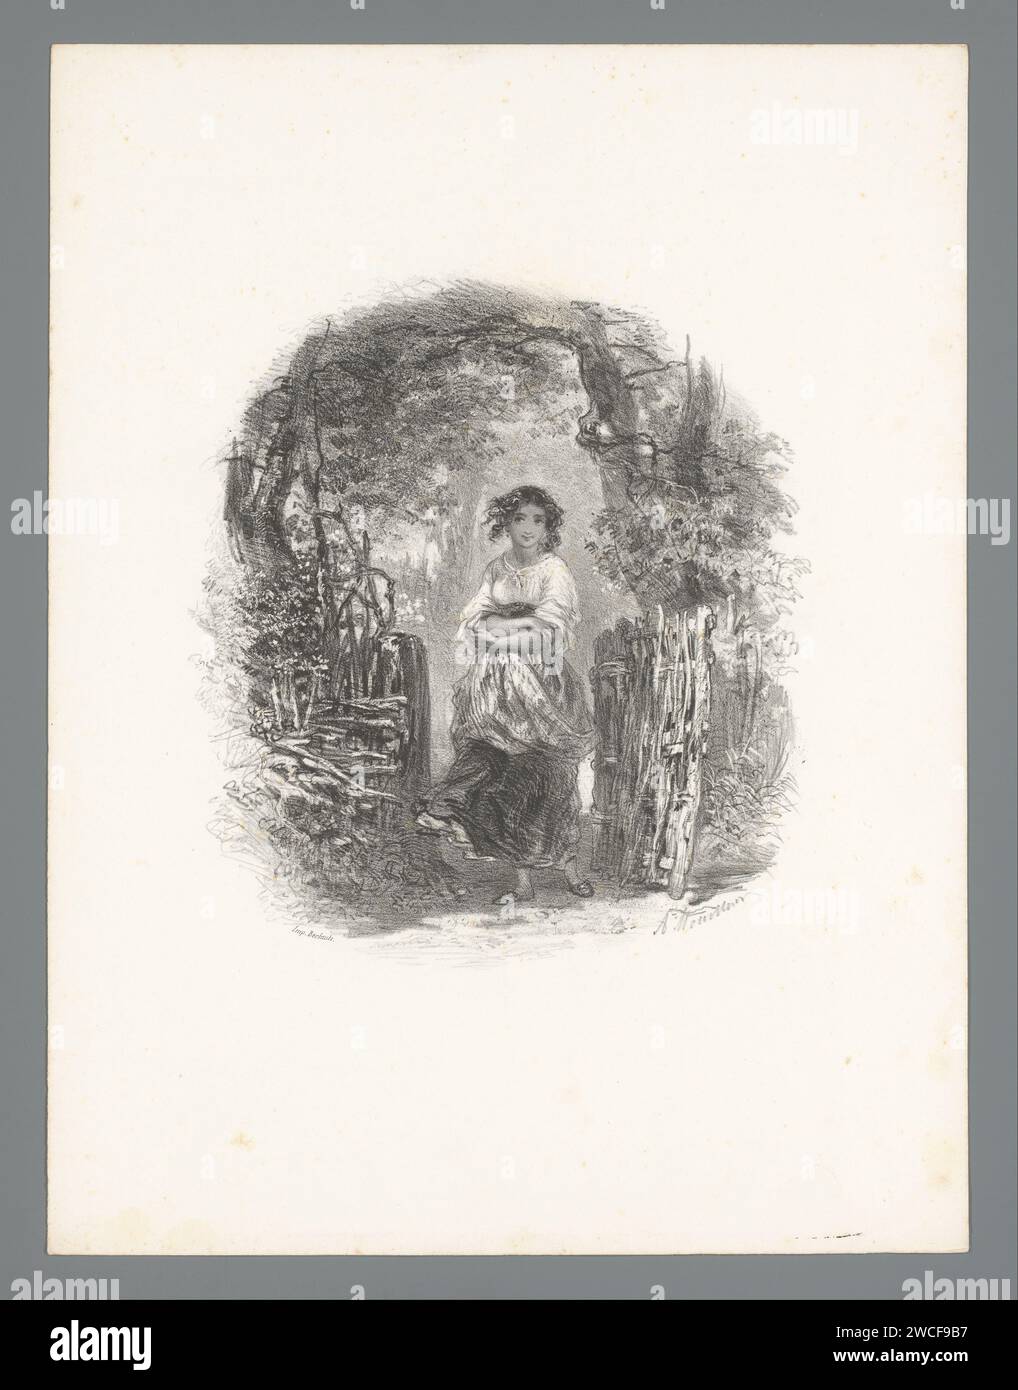 Young woman with apron runs through wooden folding gate, Adolphe Mouilleron, 1830 - 1880 print  Paris paper  adolescent, young woman, maiden. kissing gate, clap gate Stock Photo